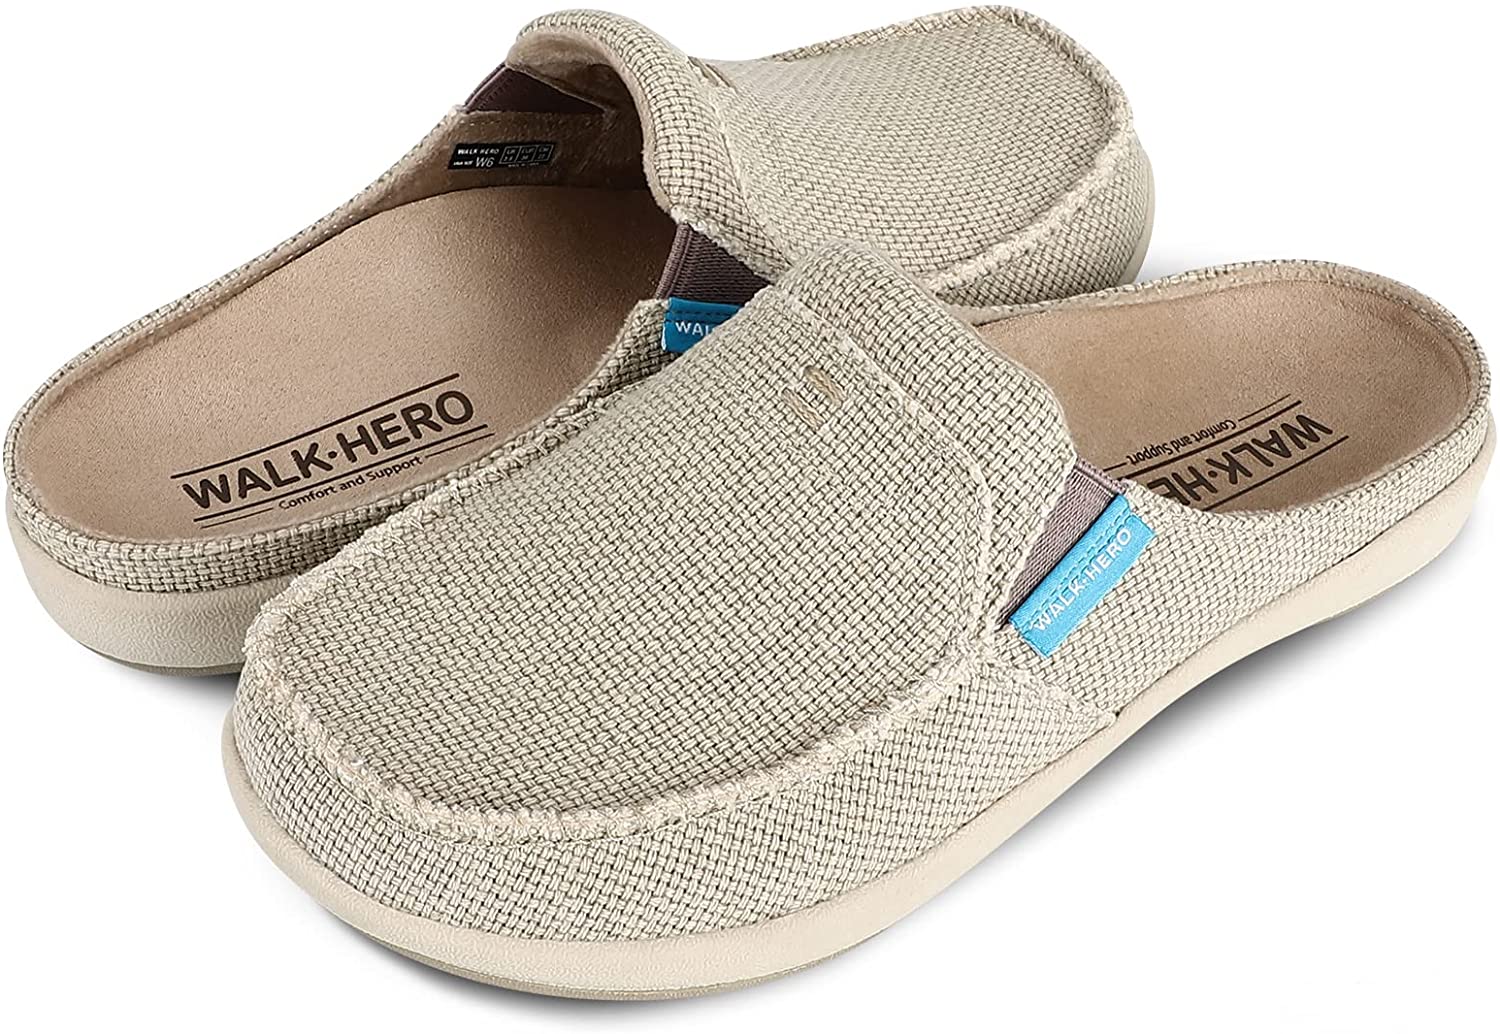 Slippers with Arch - Canvas Slipper for Women with L | eBay